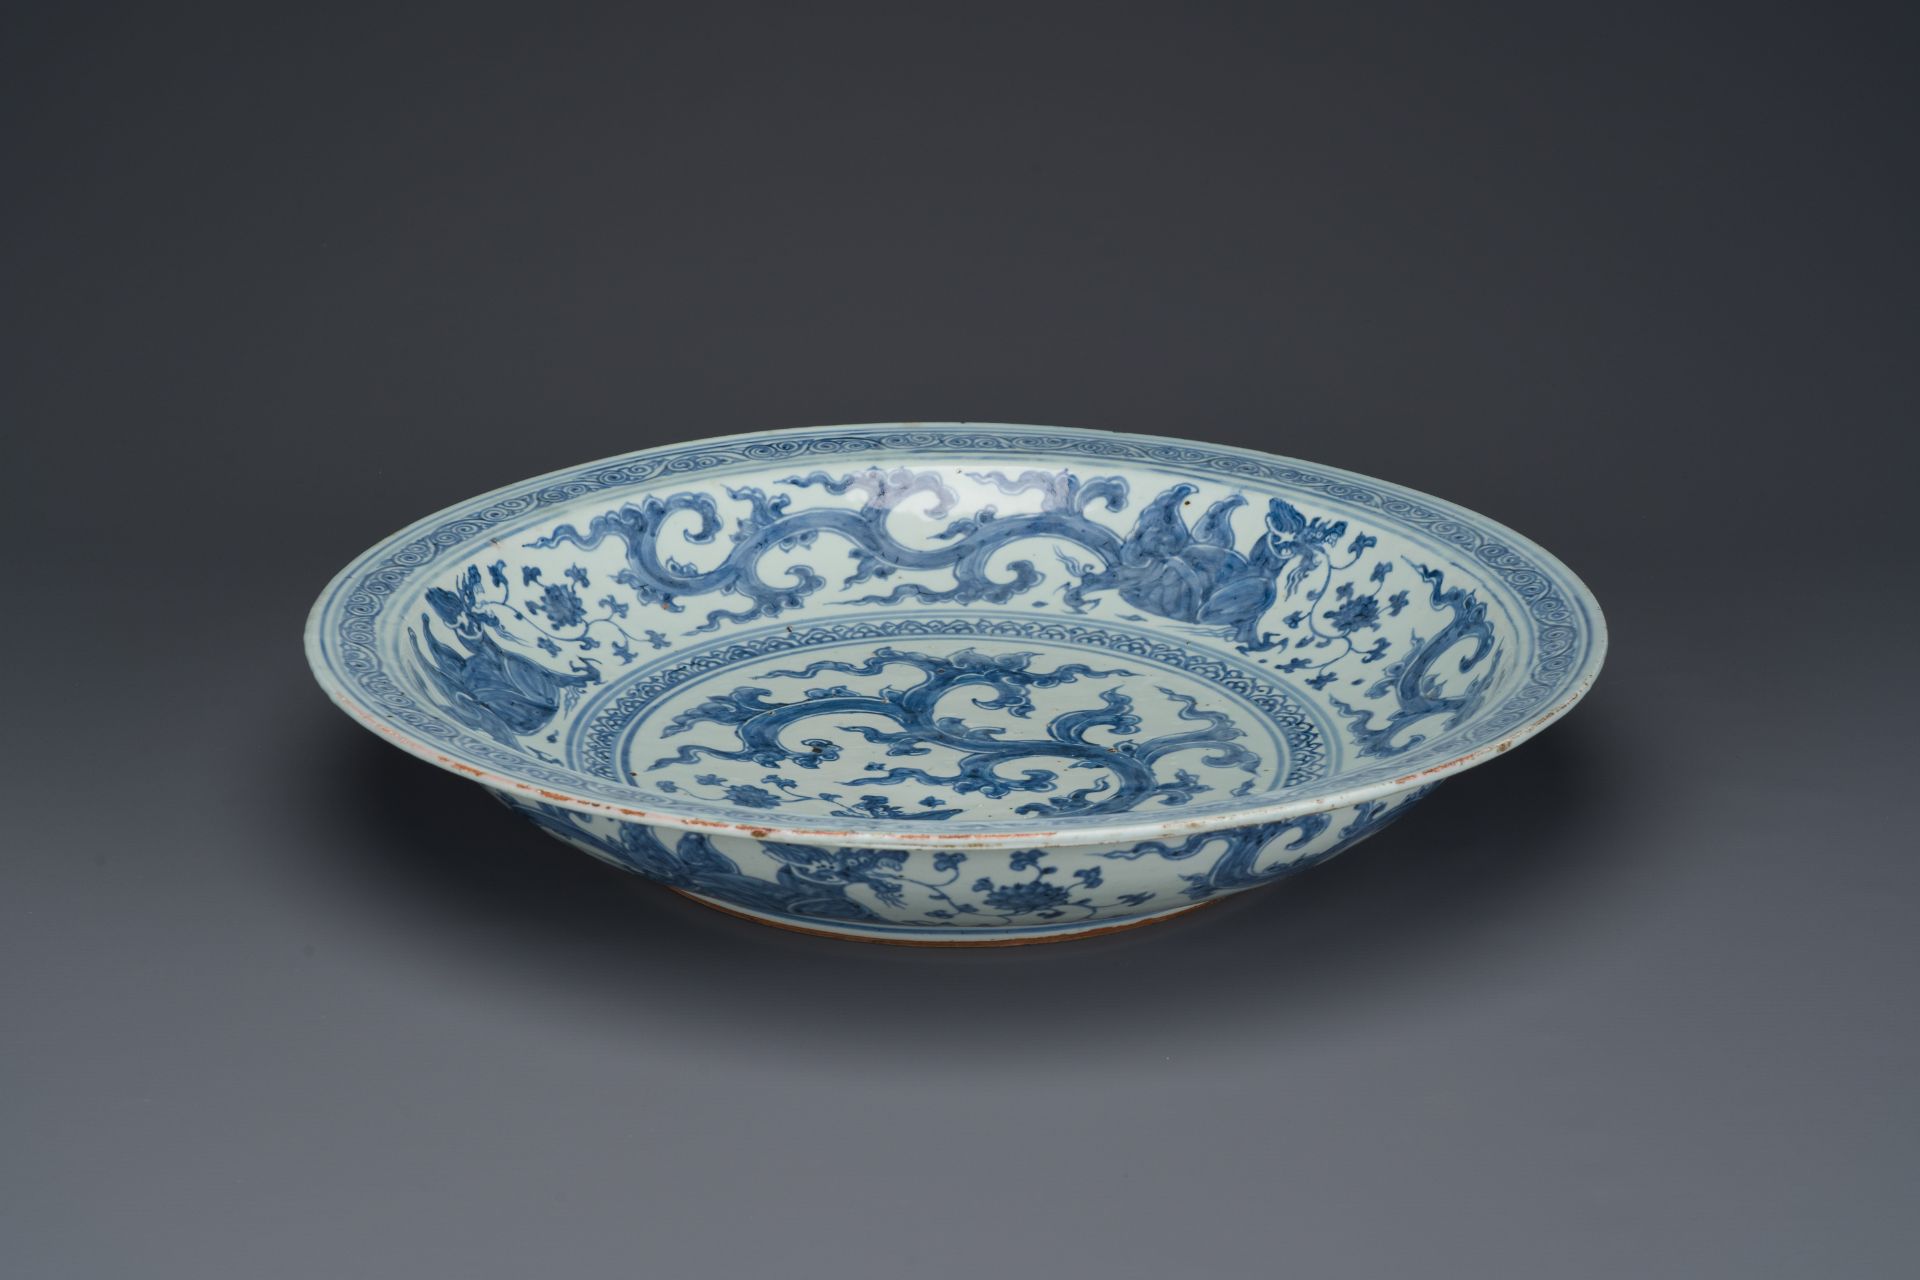 An impressive large Chinese blue and white 'dragon' dish, Ming, 2nd half 15th C. - Image 3 of 3